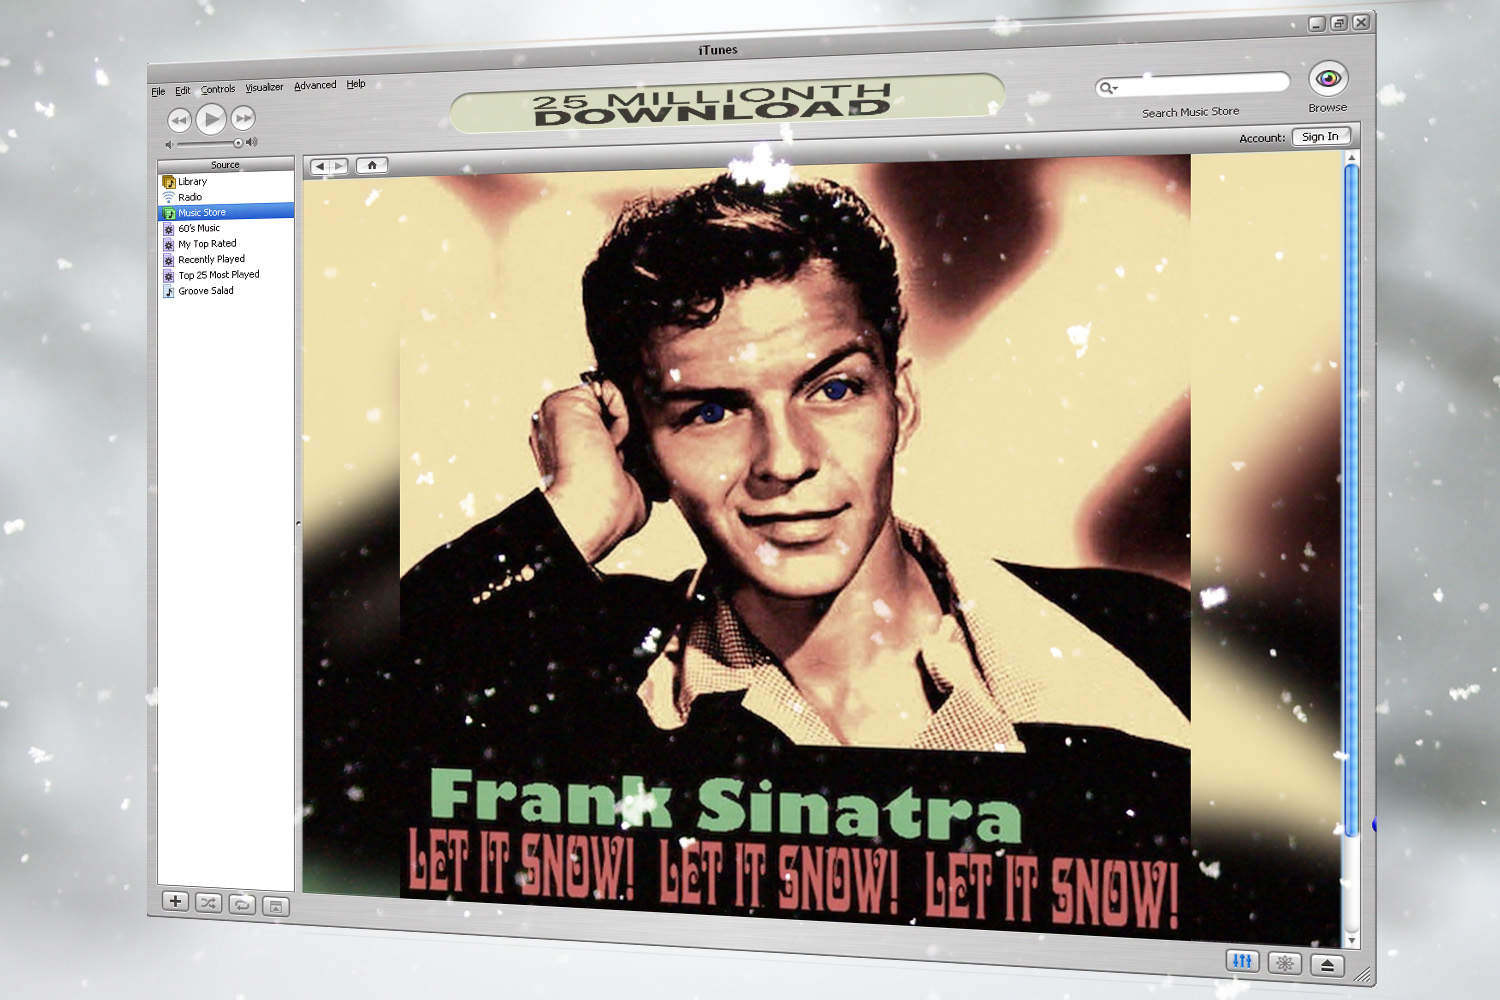 Today in Apple history: 'Let It Snow!' is iTunes' 25 millionth download.